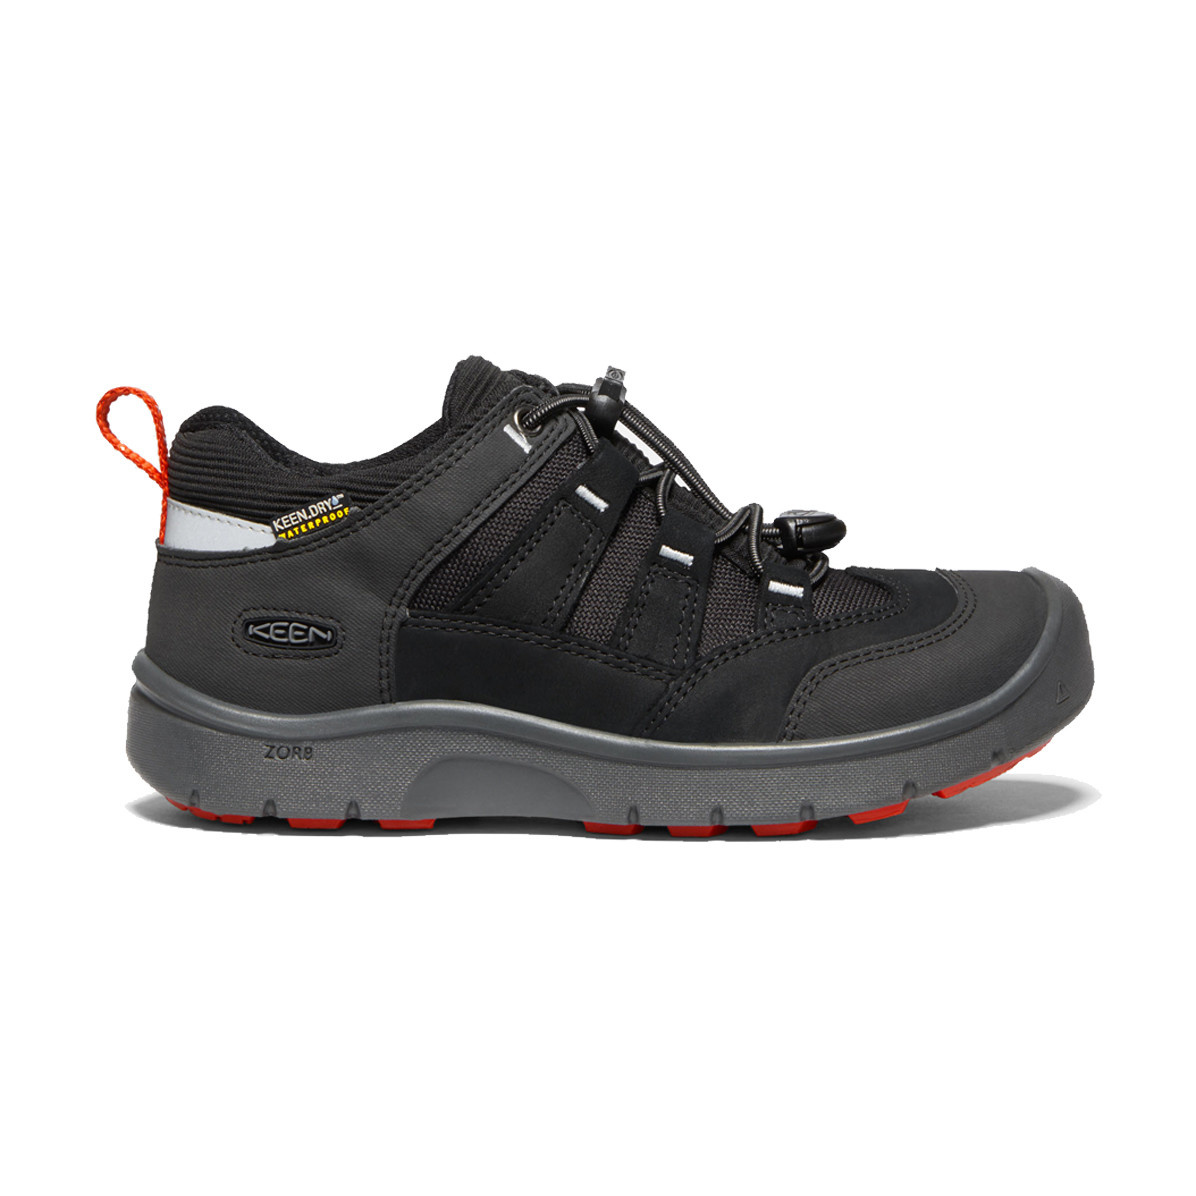 Keen Youth Hikeport WP Black/Bright Red 